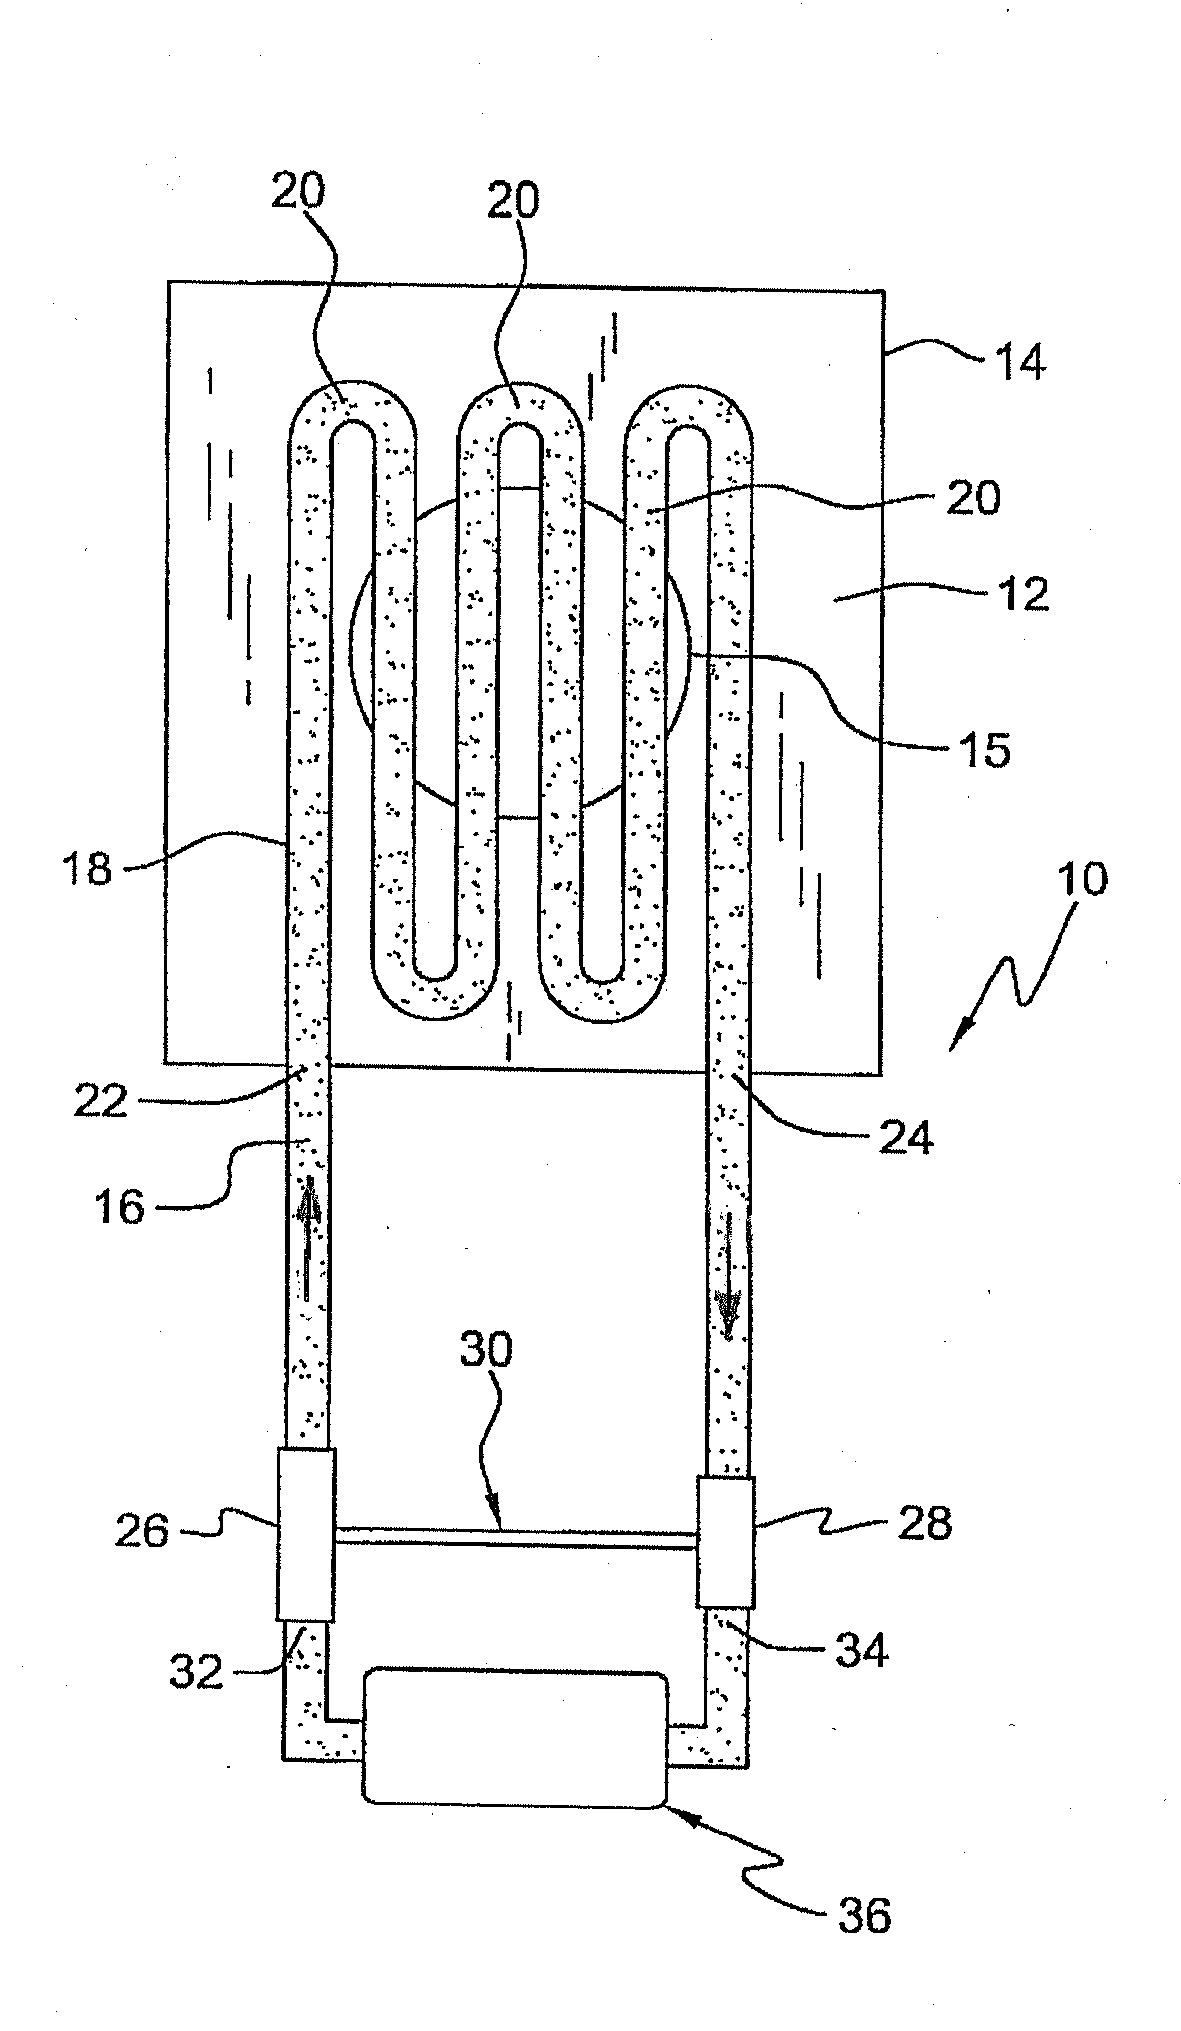 Self-pumping liquid and gas cooling system for the cooling of solar cells and heat-generating elements